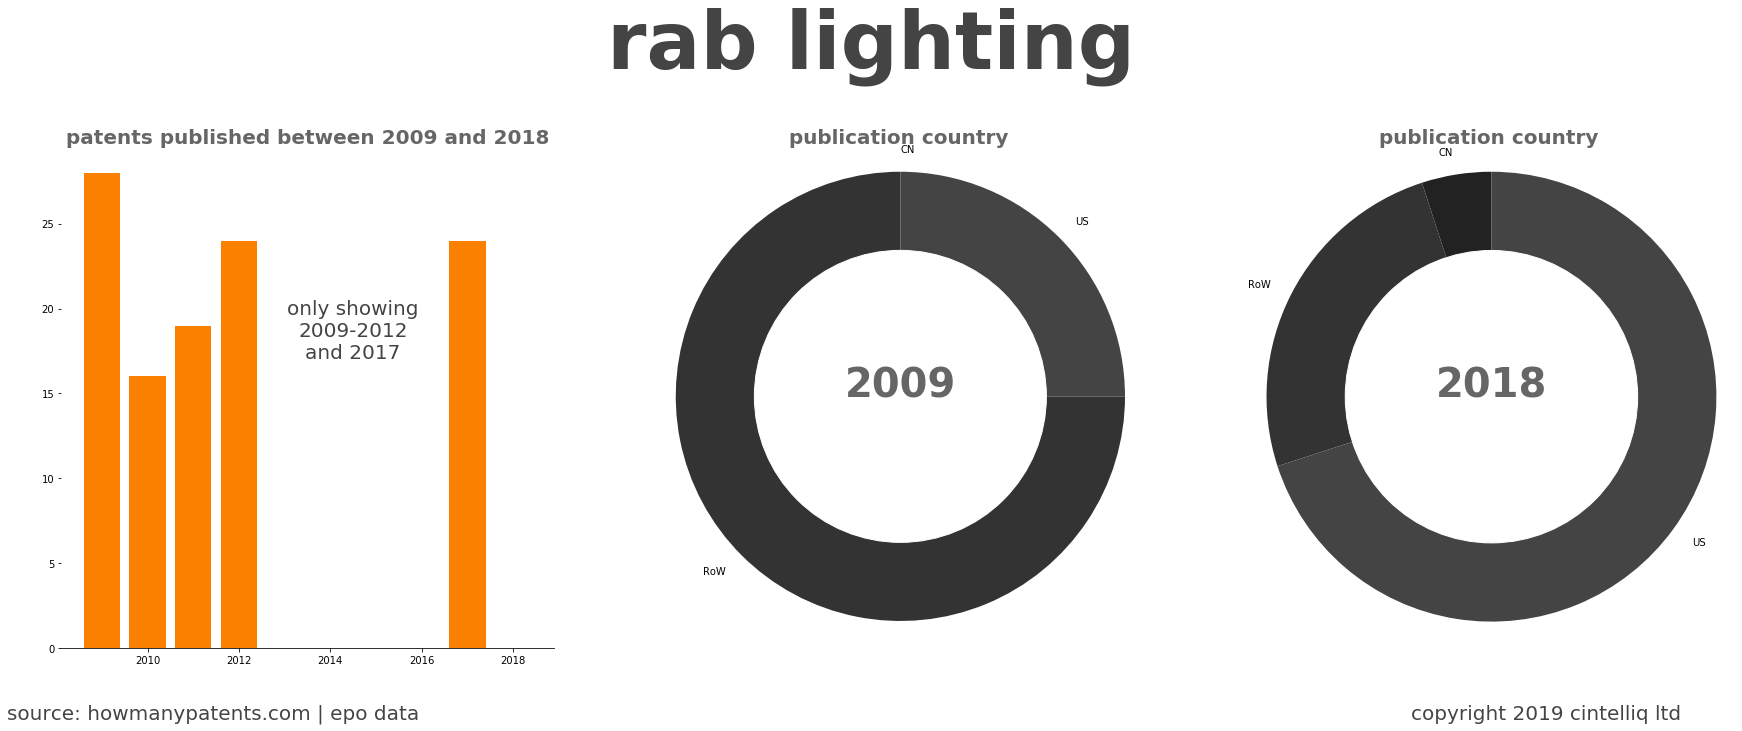 summary of patents for Rab Lighting